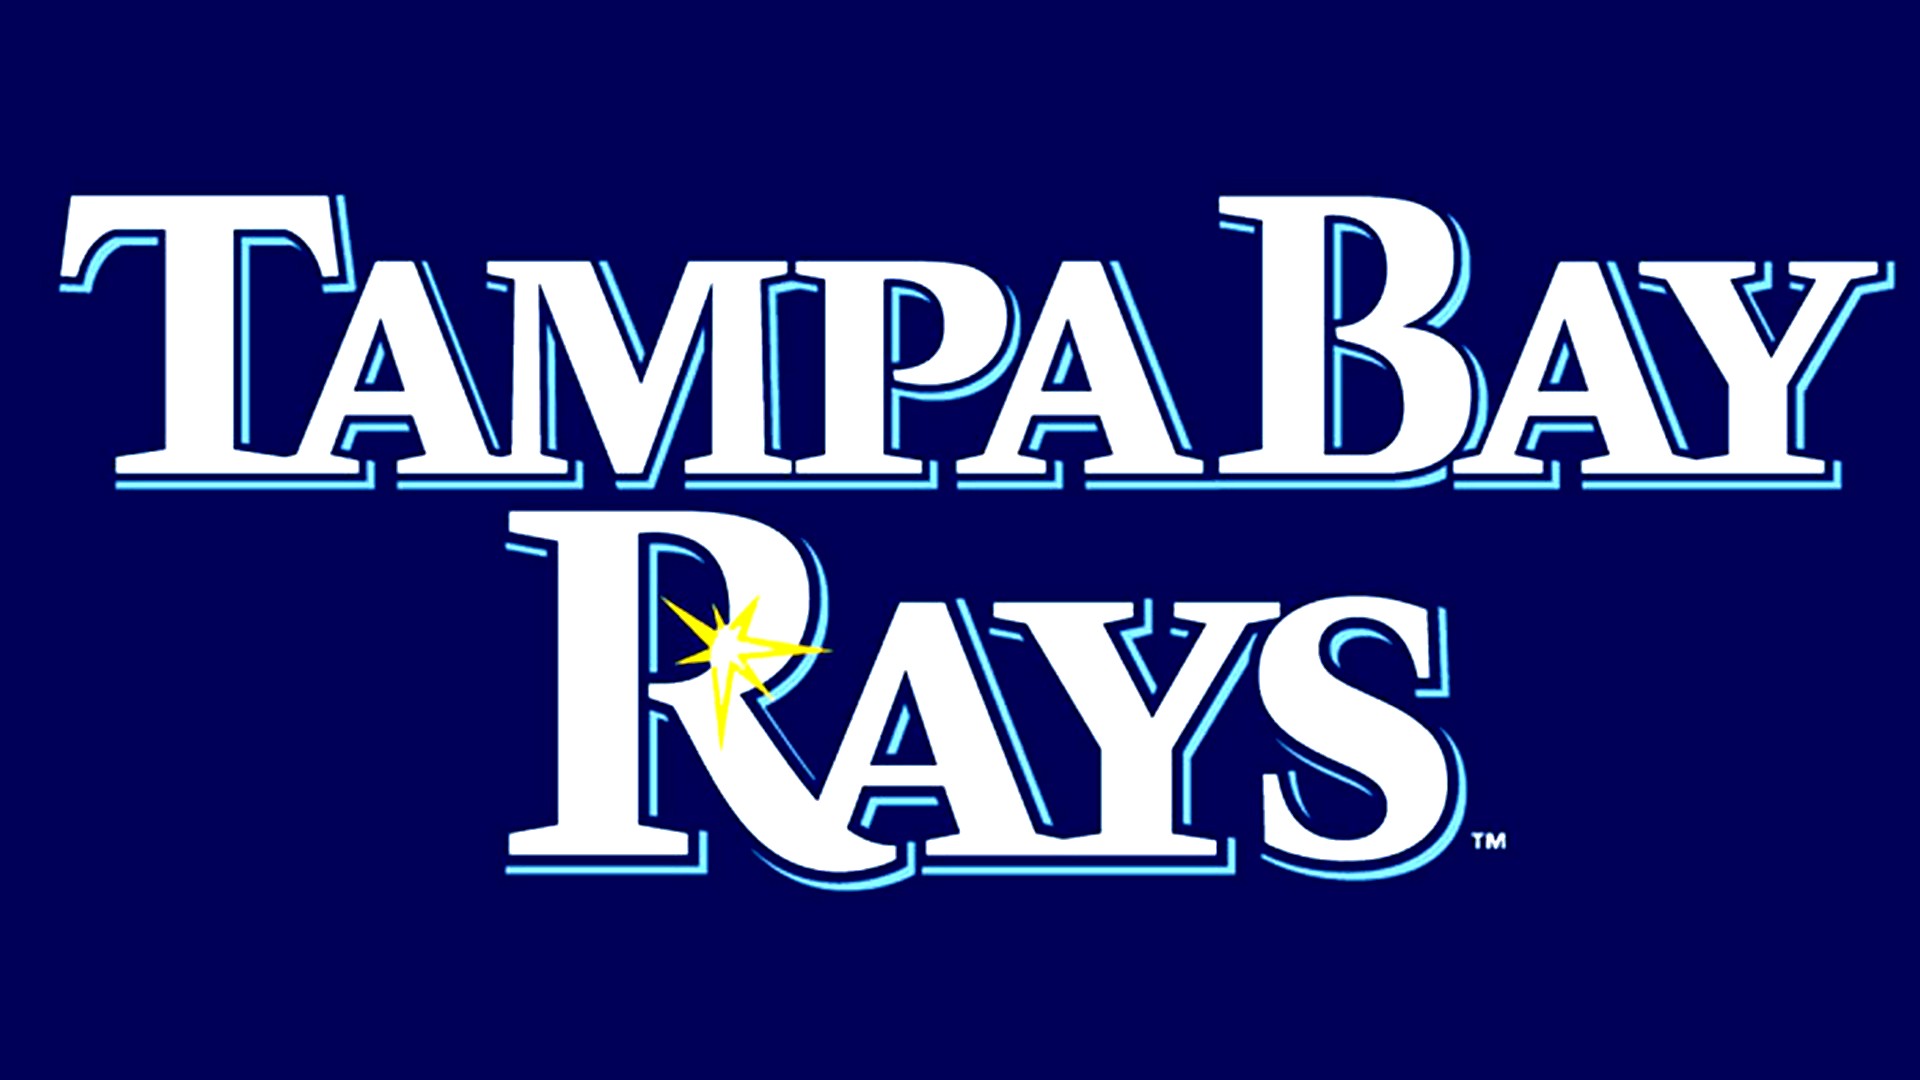 Tampa Bay Rays For Desktop Wallpaper with high-resolution 1920x1080 pixel. You can use this wallpaper for Mac Desktop Wallpaper, Laptop Screensavers, Android Wallpapers, Tablet or iPhone Home Screen and another mobile phone device